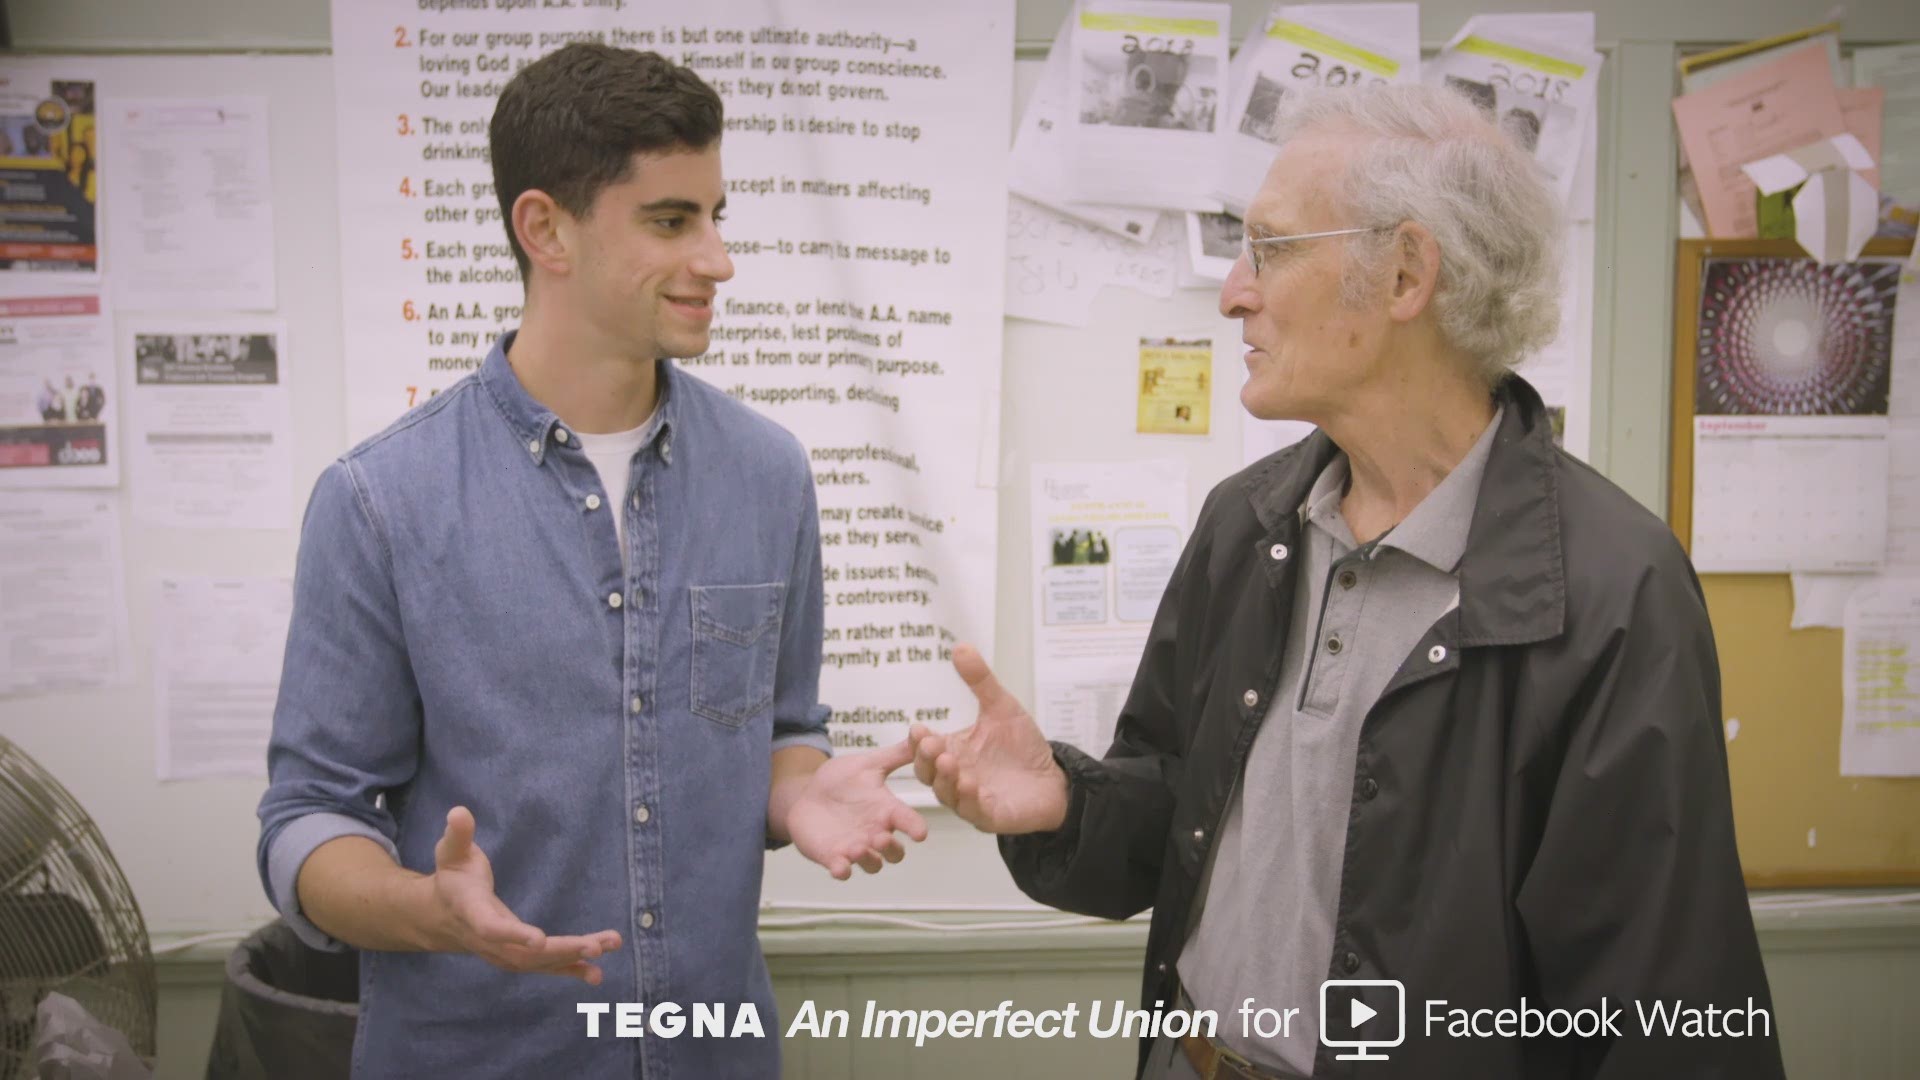 Mike hasn't voted in more than 50 years. Gideon is inspiring people to vote on his college campus. Here's what happened when they met.